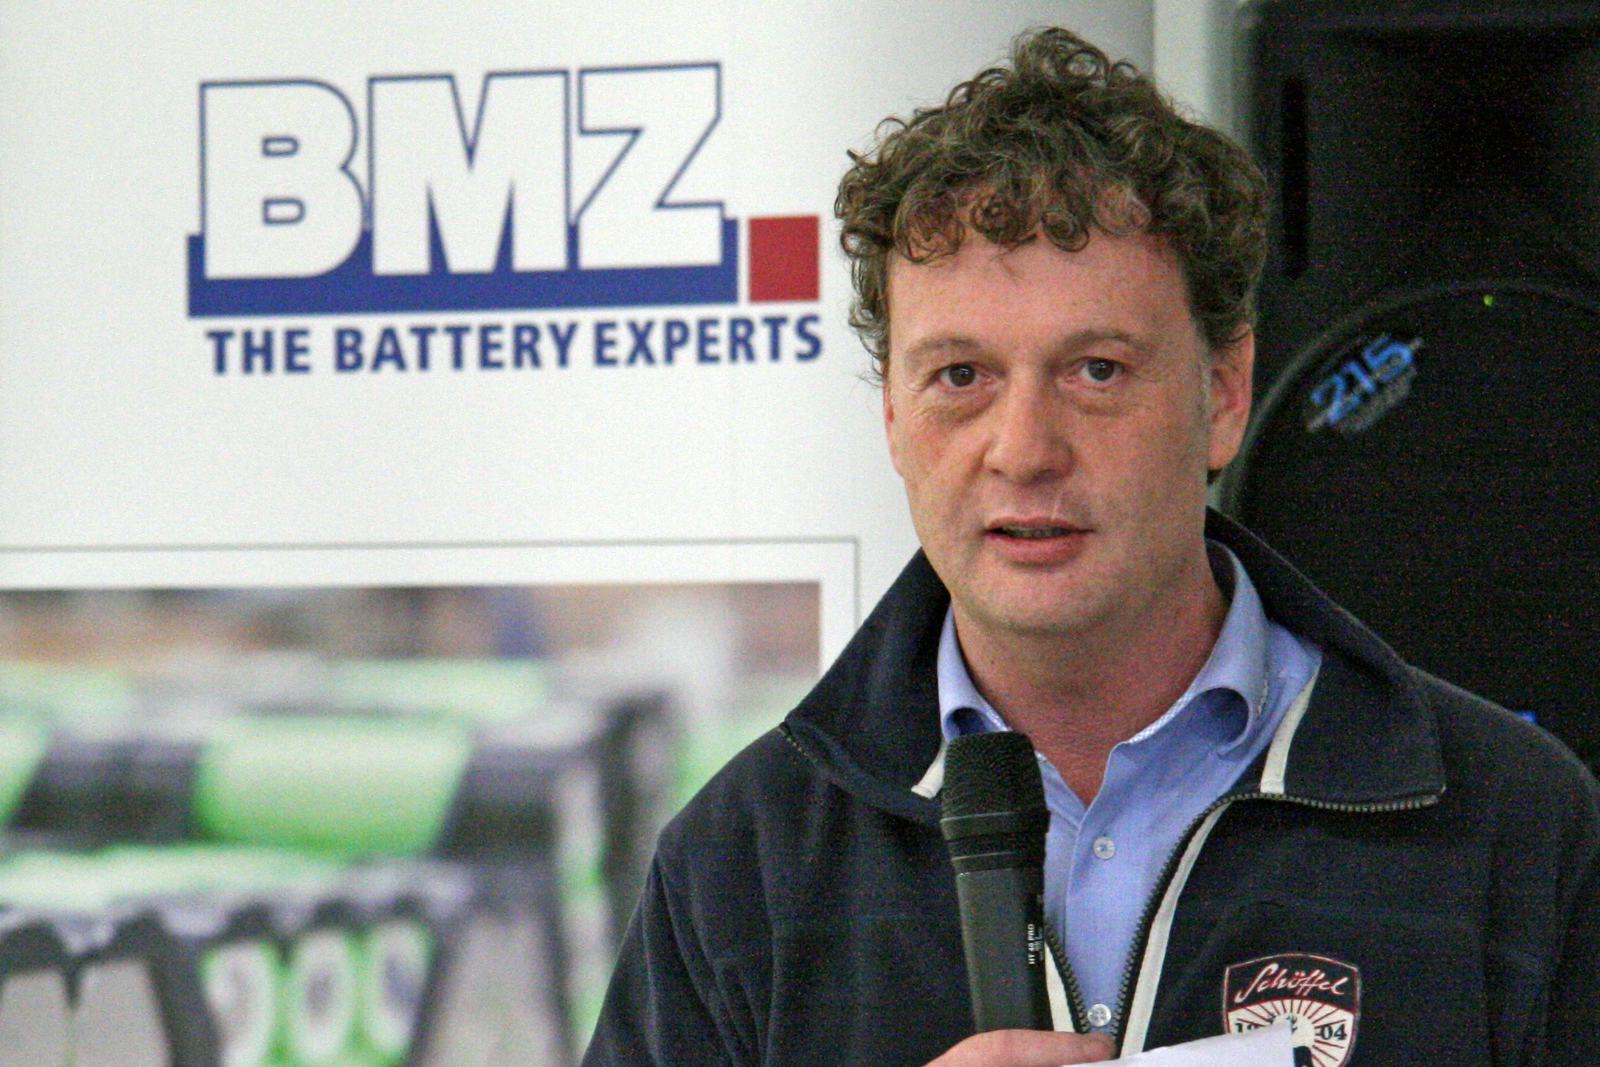 BMZ general manager Sven Bauer, ‘We will continue to expand manufacturing activities in Germany.’ – Photo Jo Beckendorff